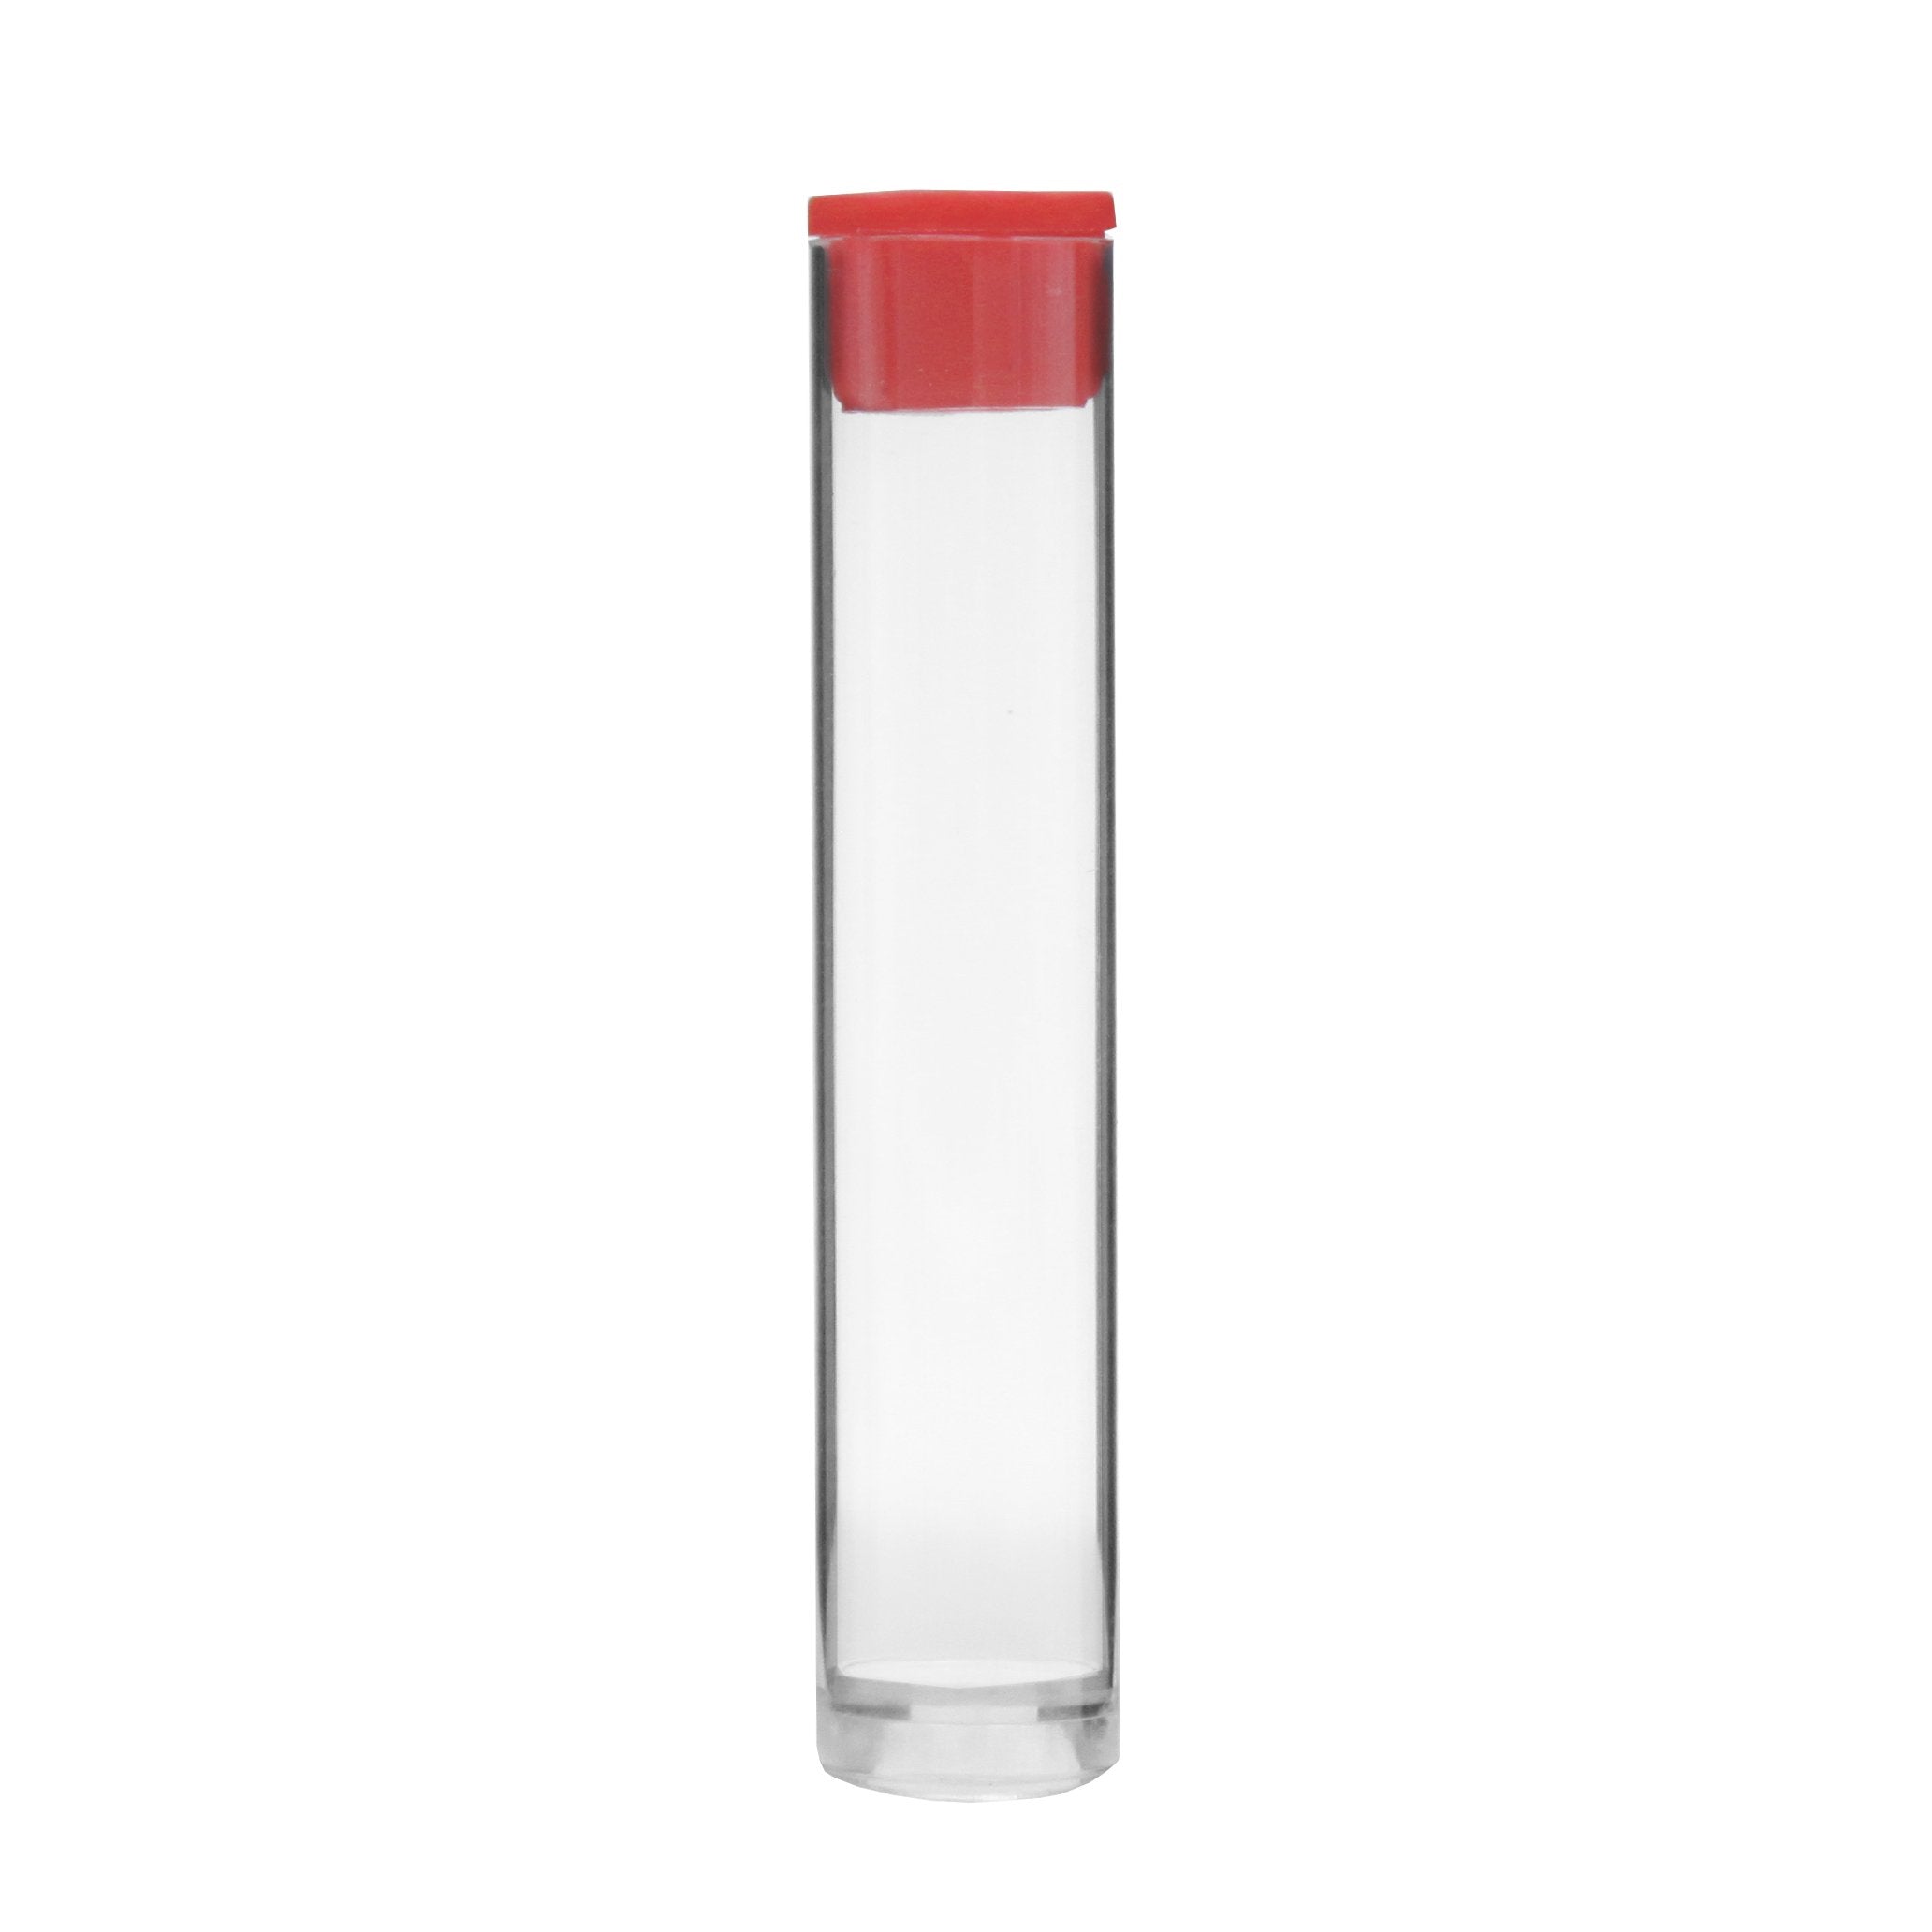 Plastic Tubes for Cartridges 12mm x 81mm Red